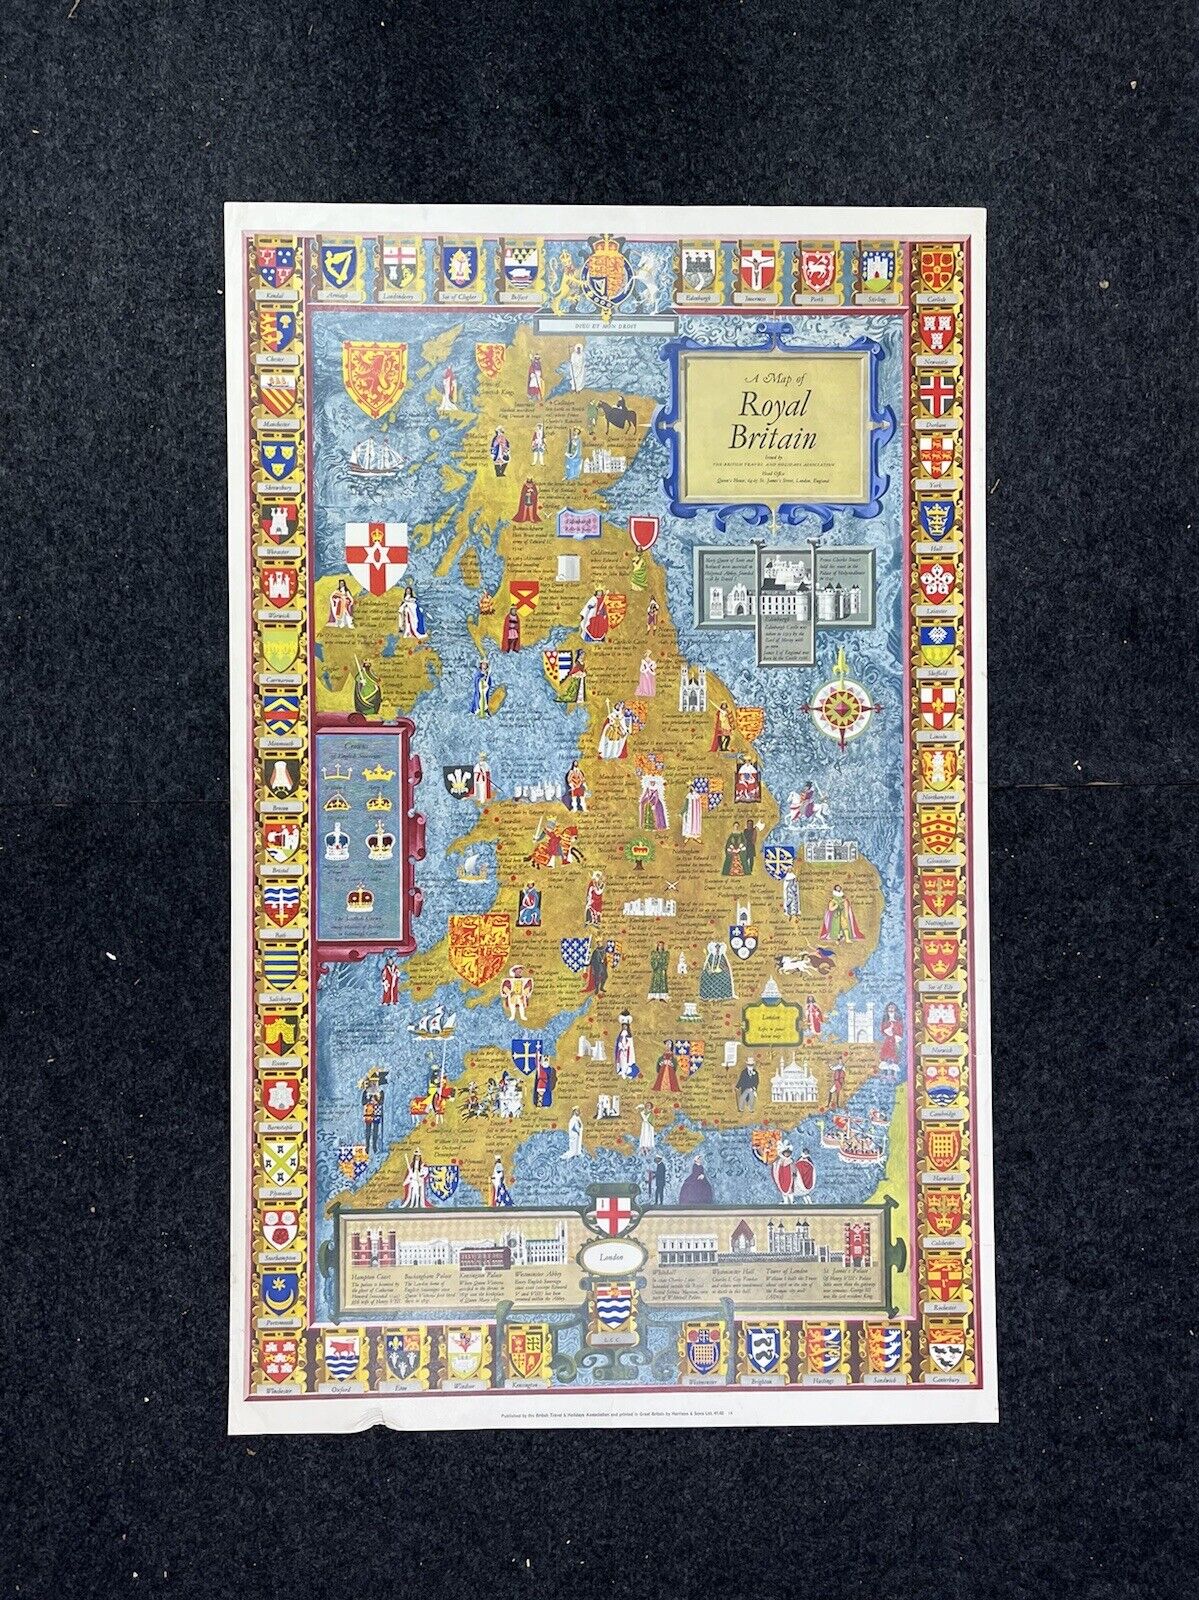 1950s Vintage Map of Royal Britain -The British Travel and Holiday